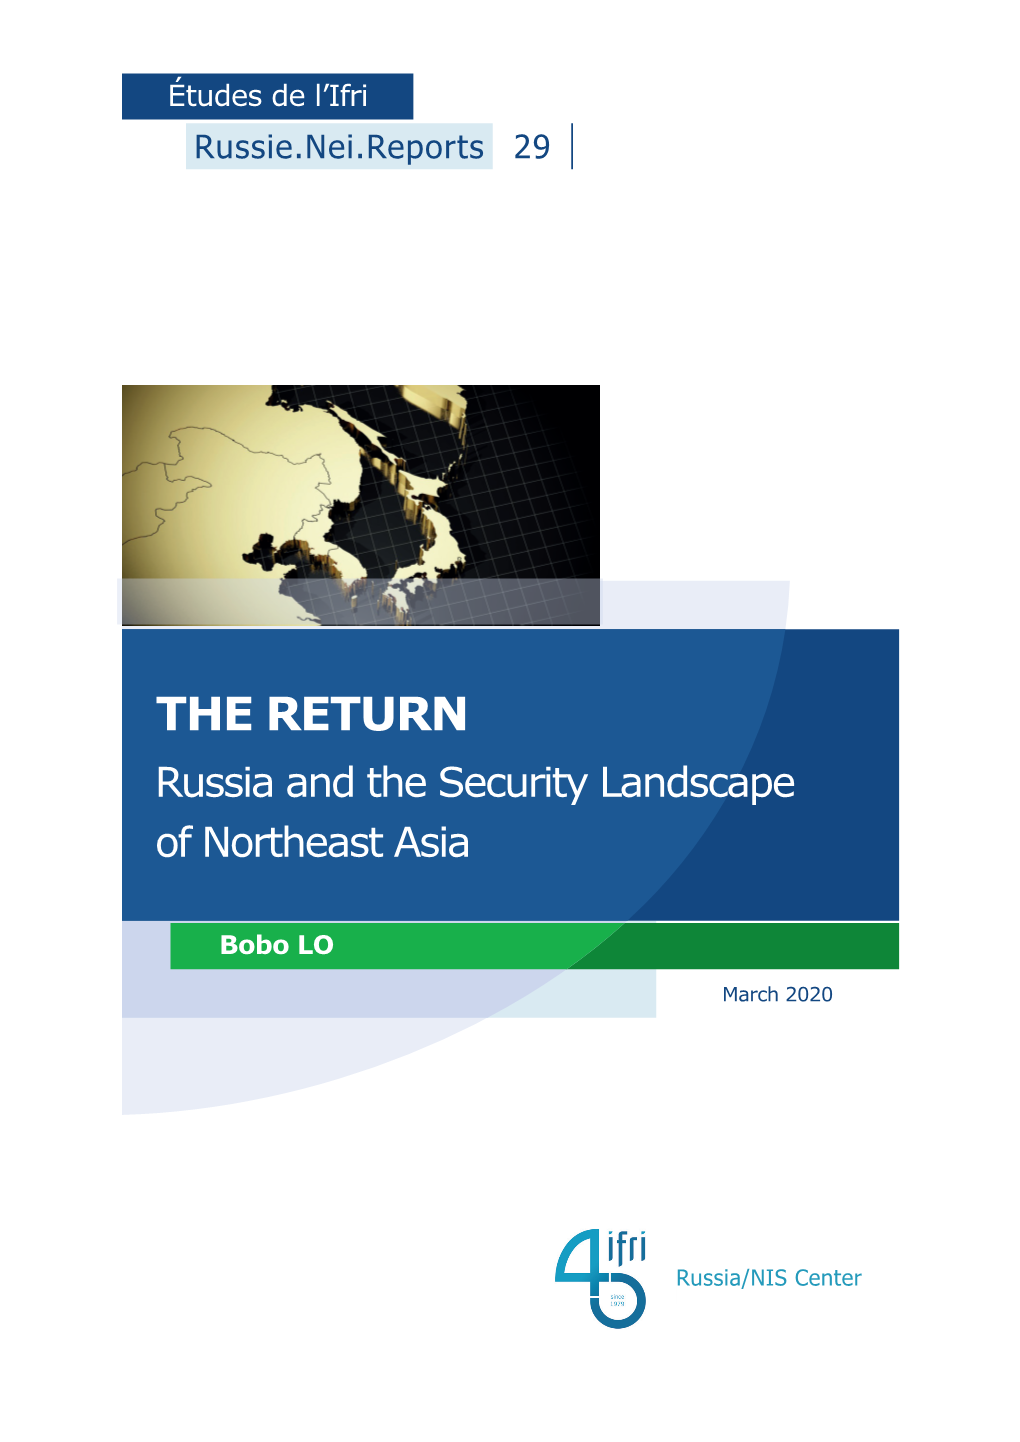 Russia and the Security Landscape of Northeast Asia